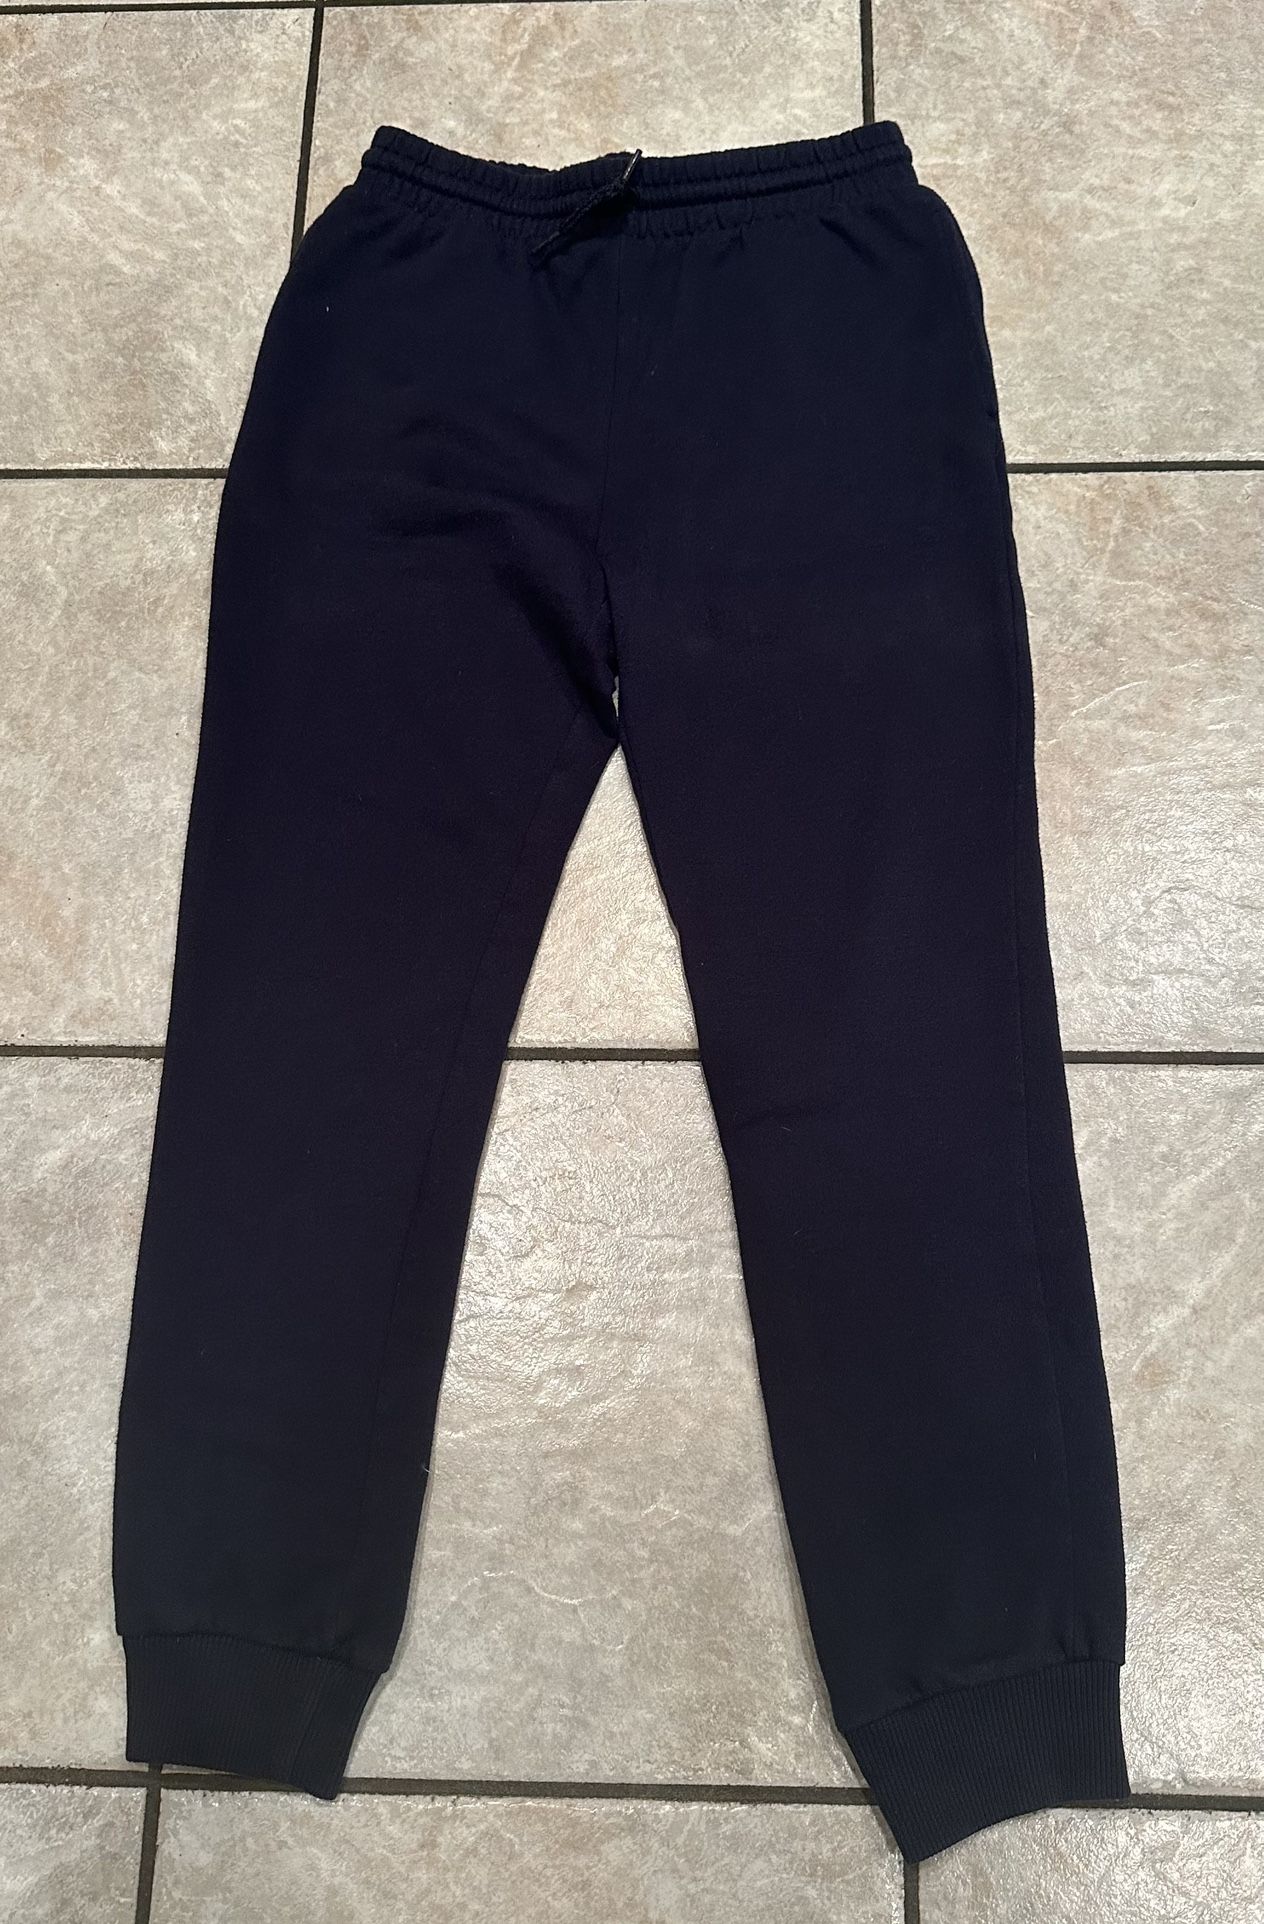 👖Boys Yourh Size XL (14) Kids Athletic Wear Sweat Pants and Joggers. Blue pair are New Balance and navy blue pair of joggers are Children's Place 